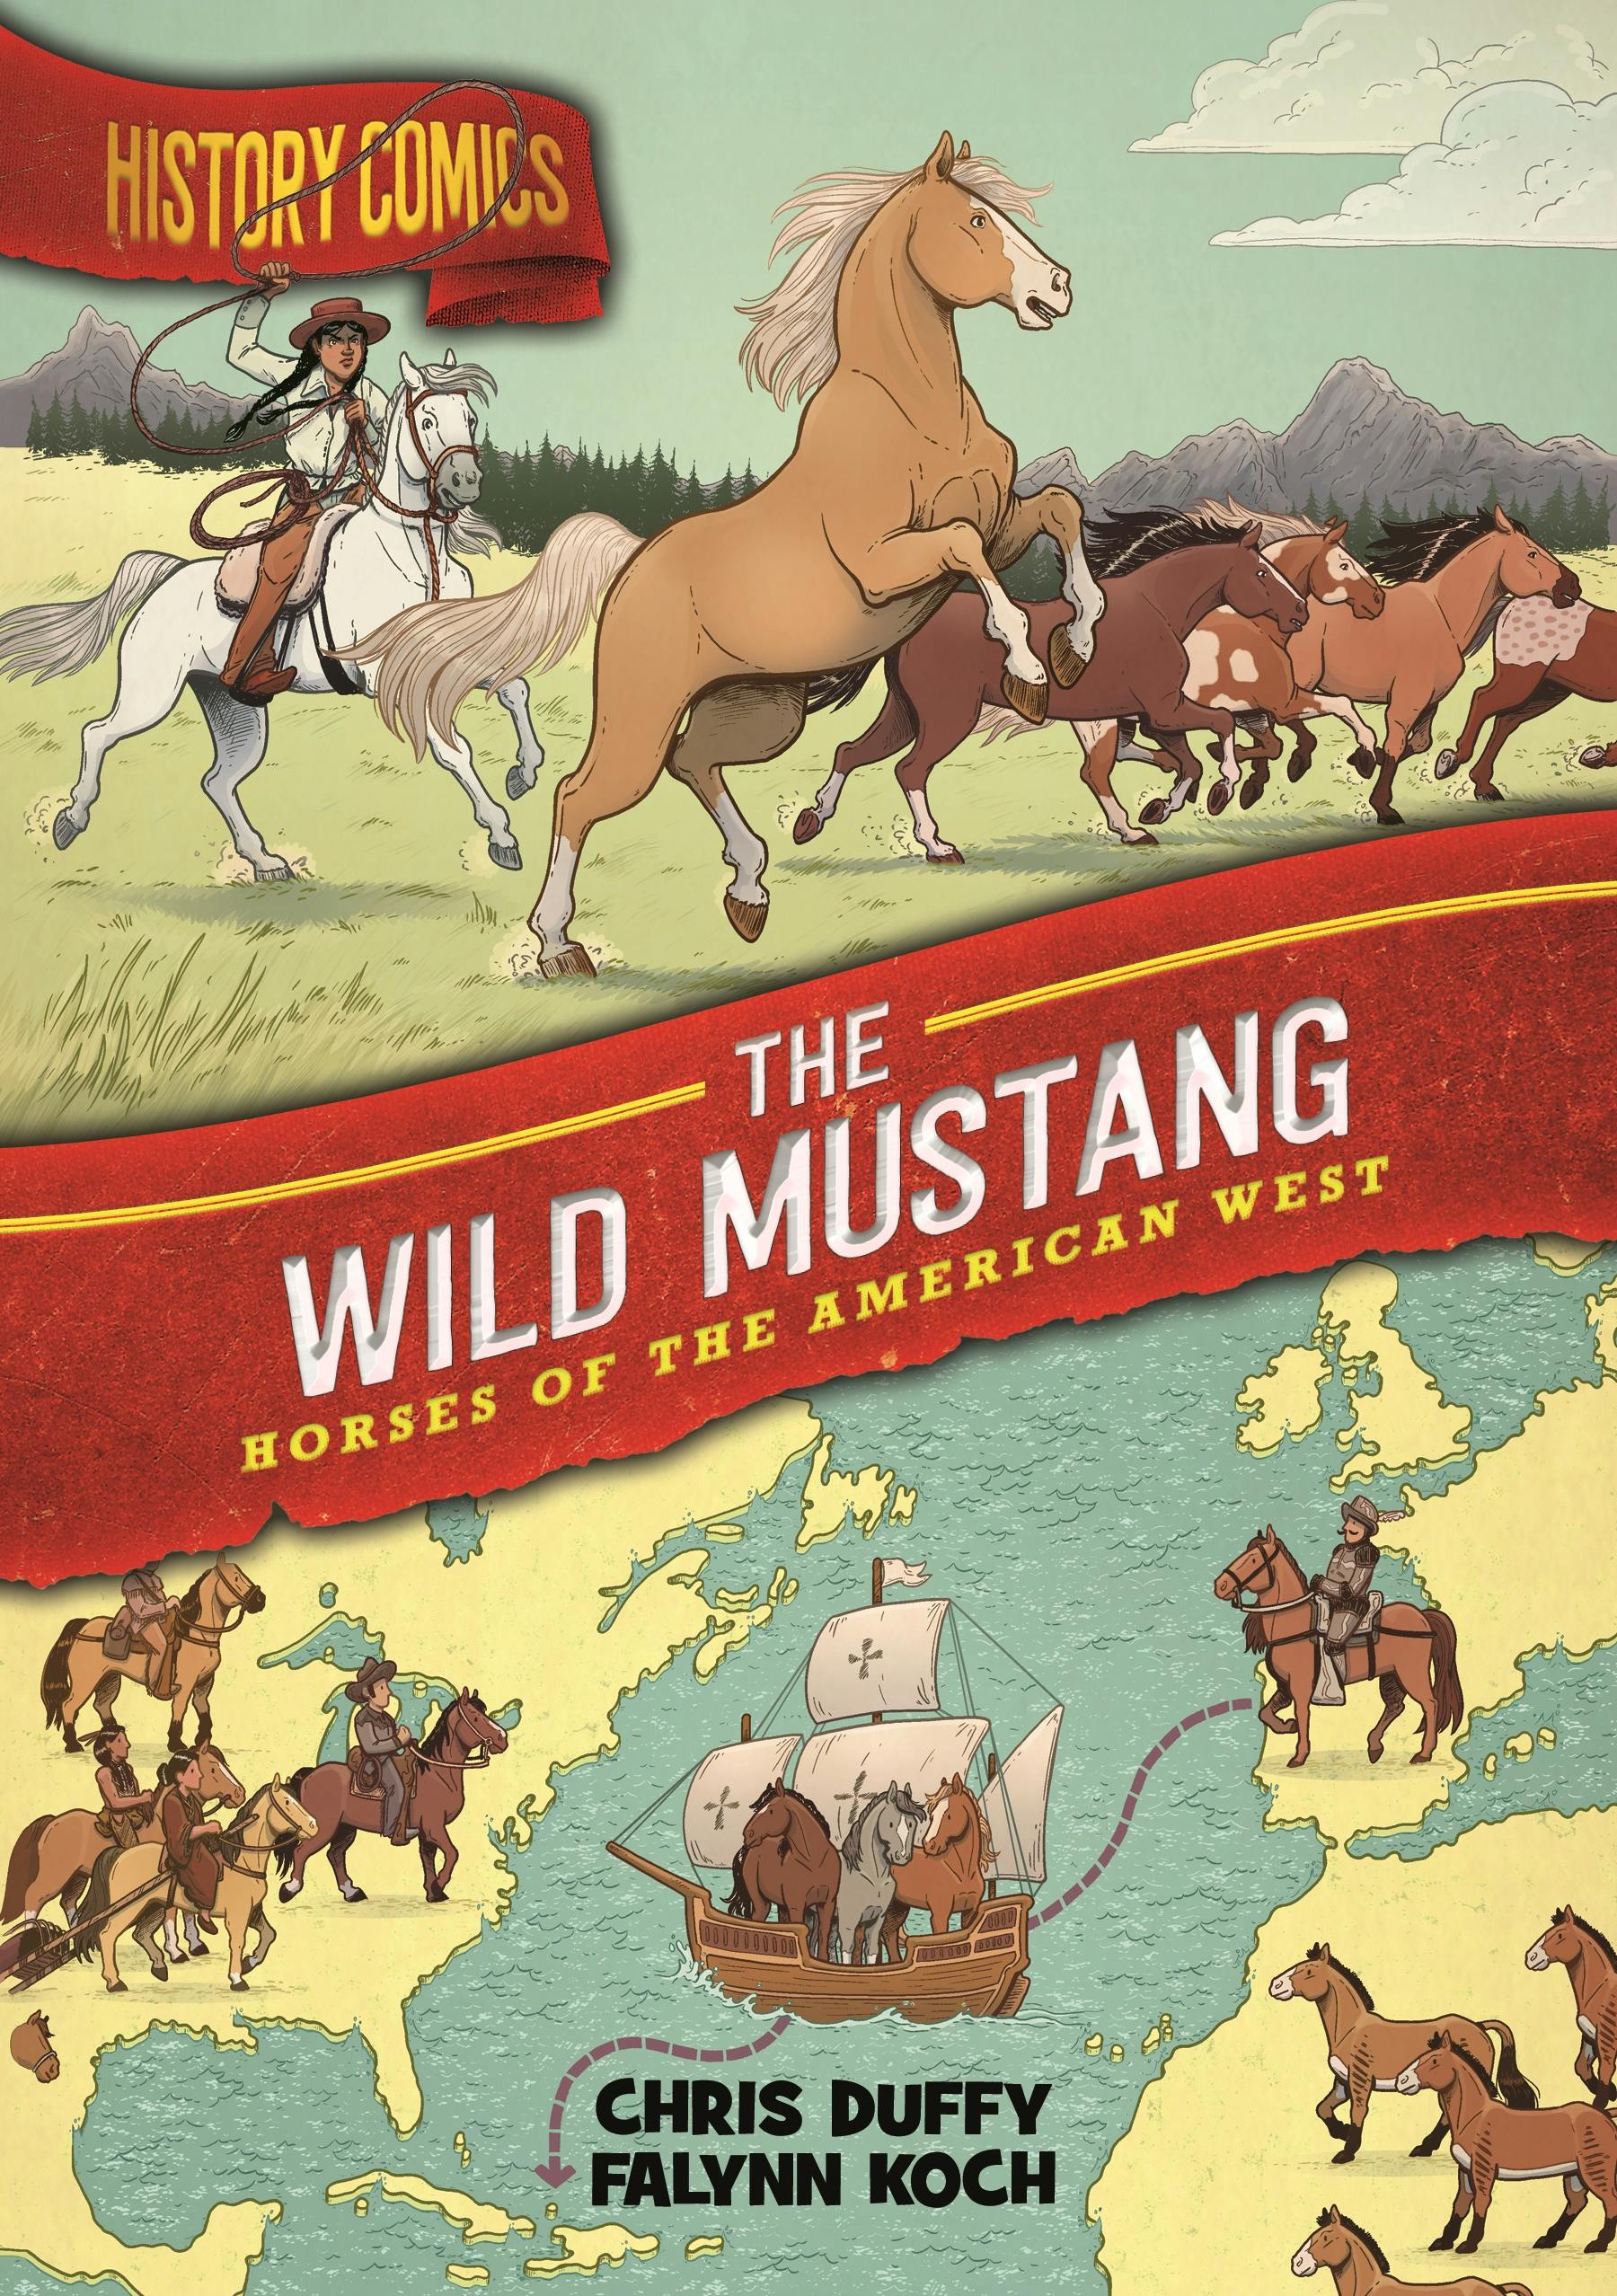 Image of History Comics: The Wild Mustang